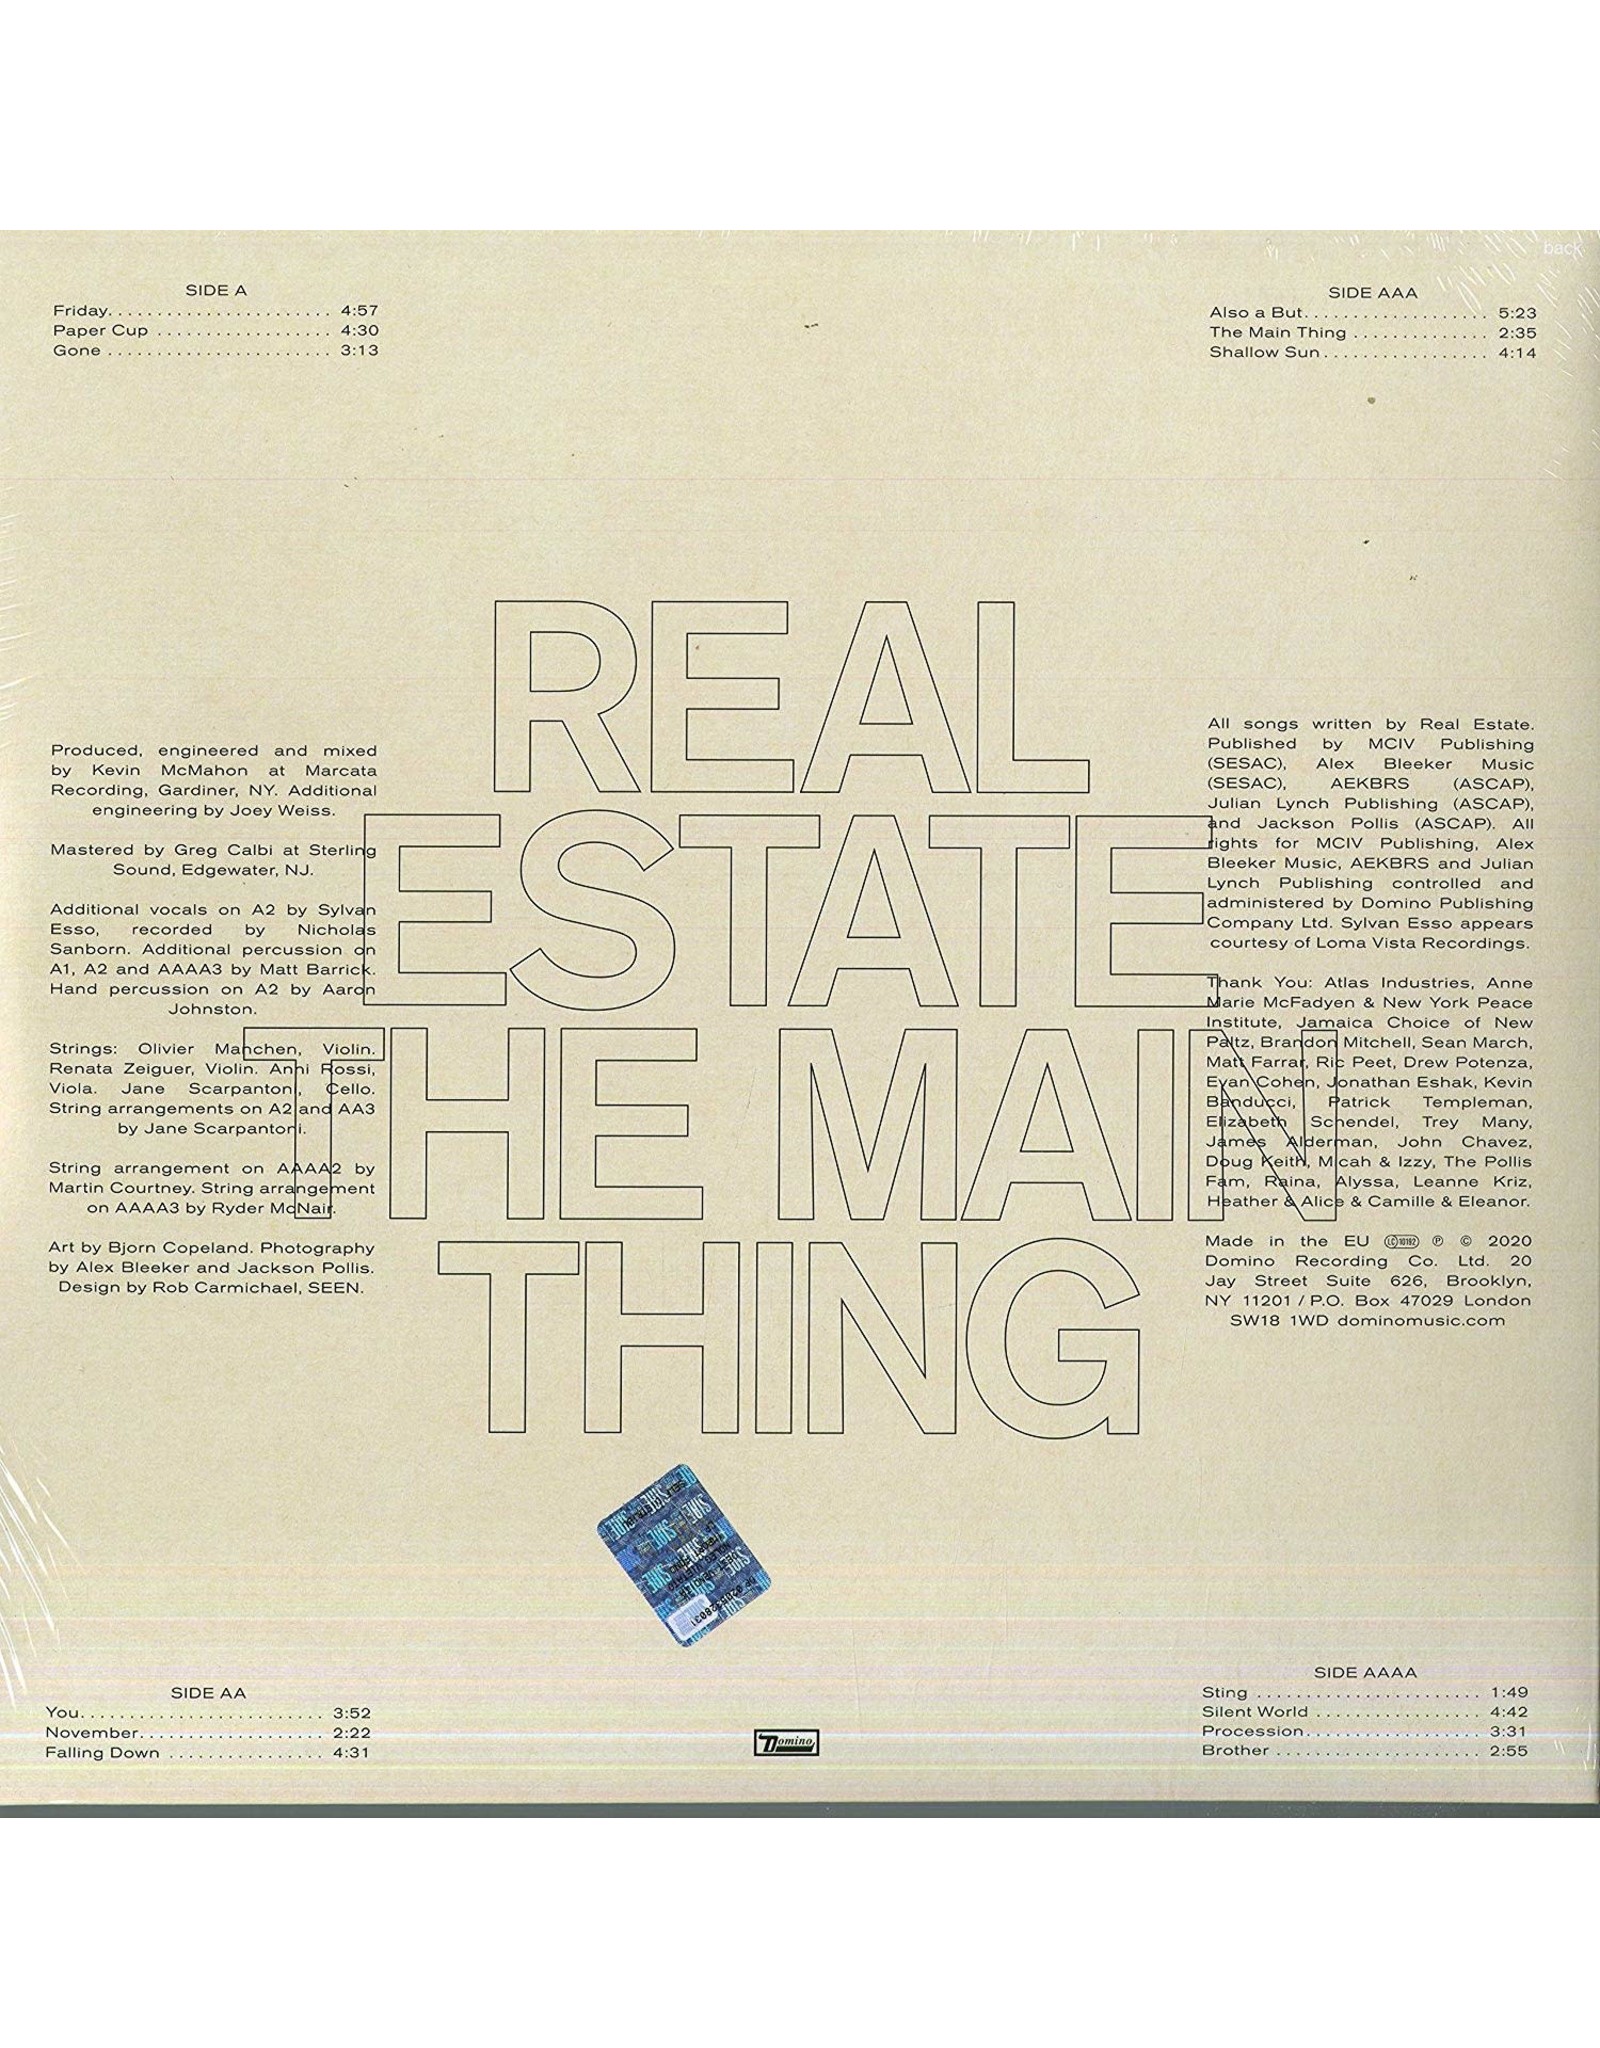 Real Estate - The Main Thing (Exclusive Vinyl Edtion)